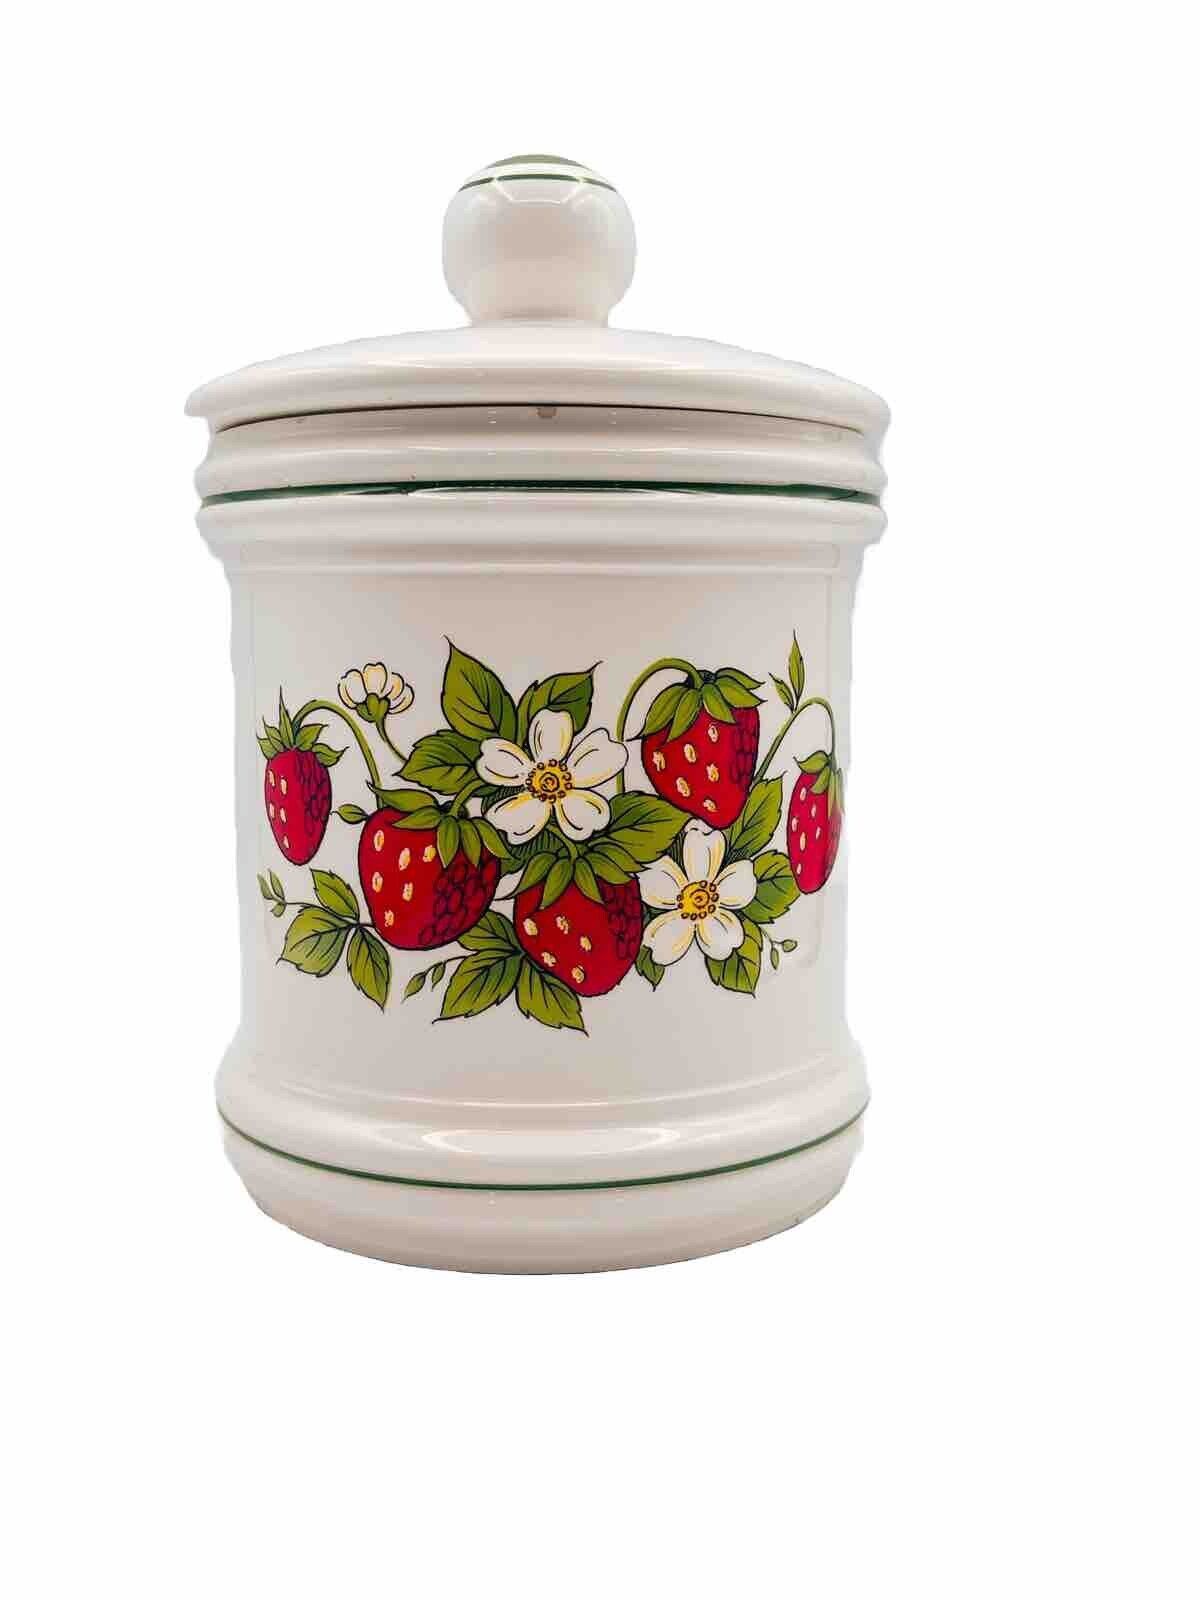 Vintage Sears Strawberry Fields Canister 1970s Lidded Kitchen Japan 9\